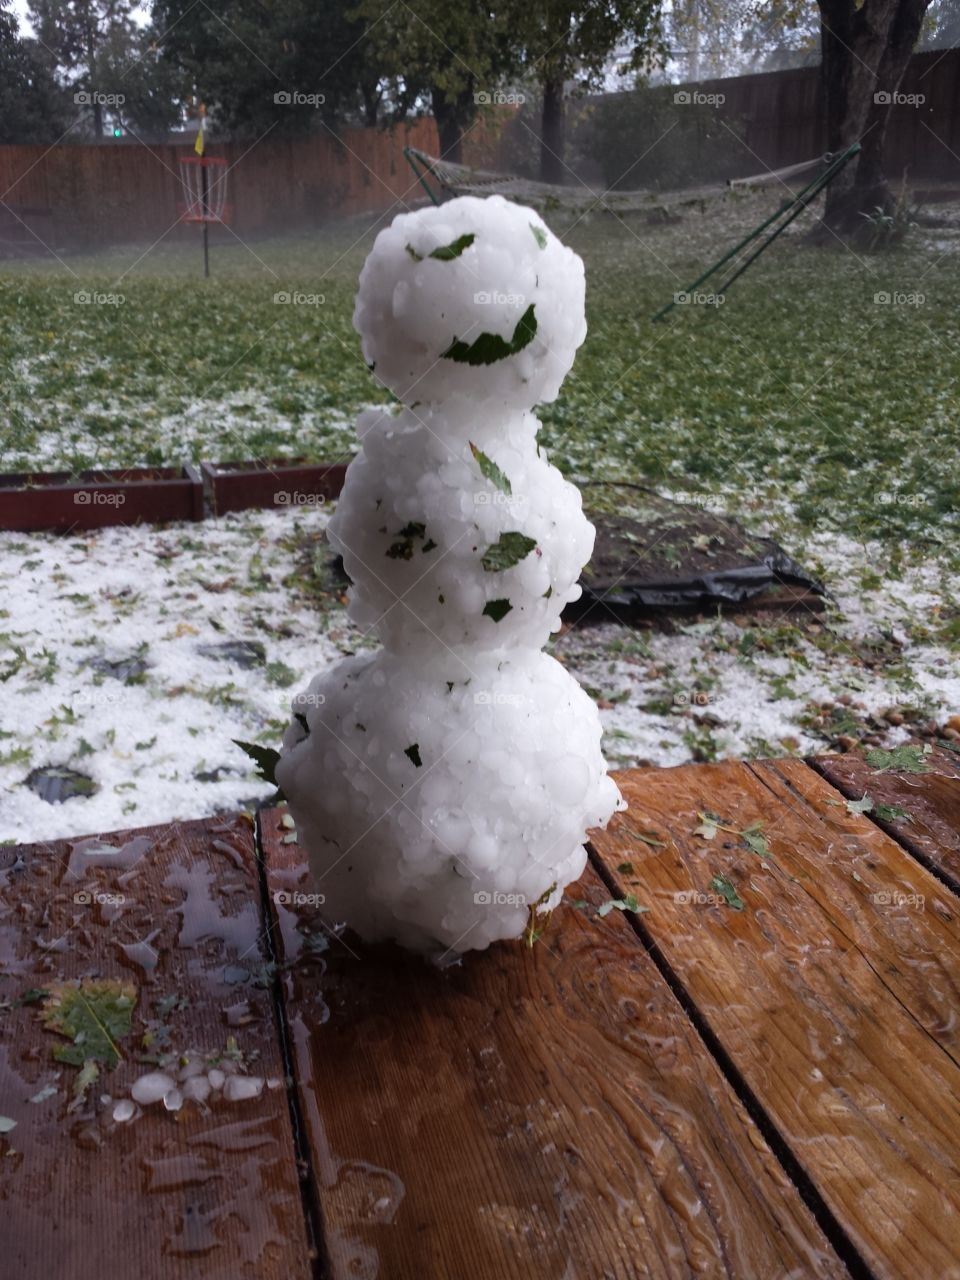 Hailman - Came to life after a immense hailstorm.